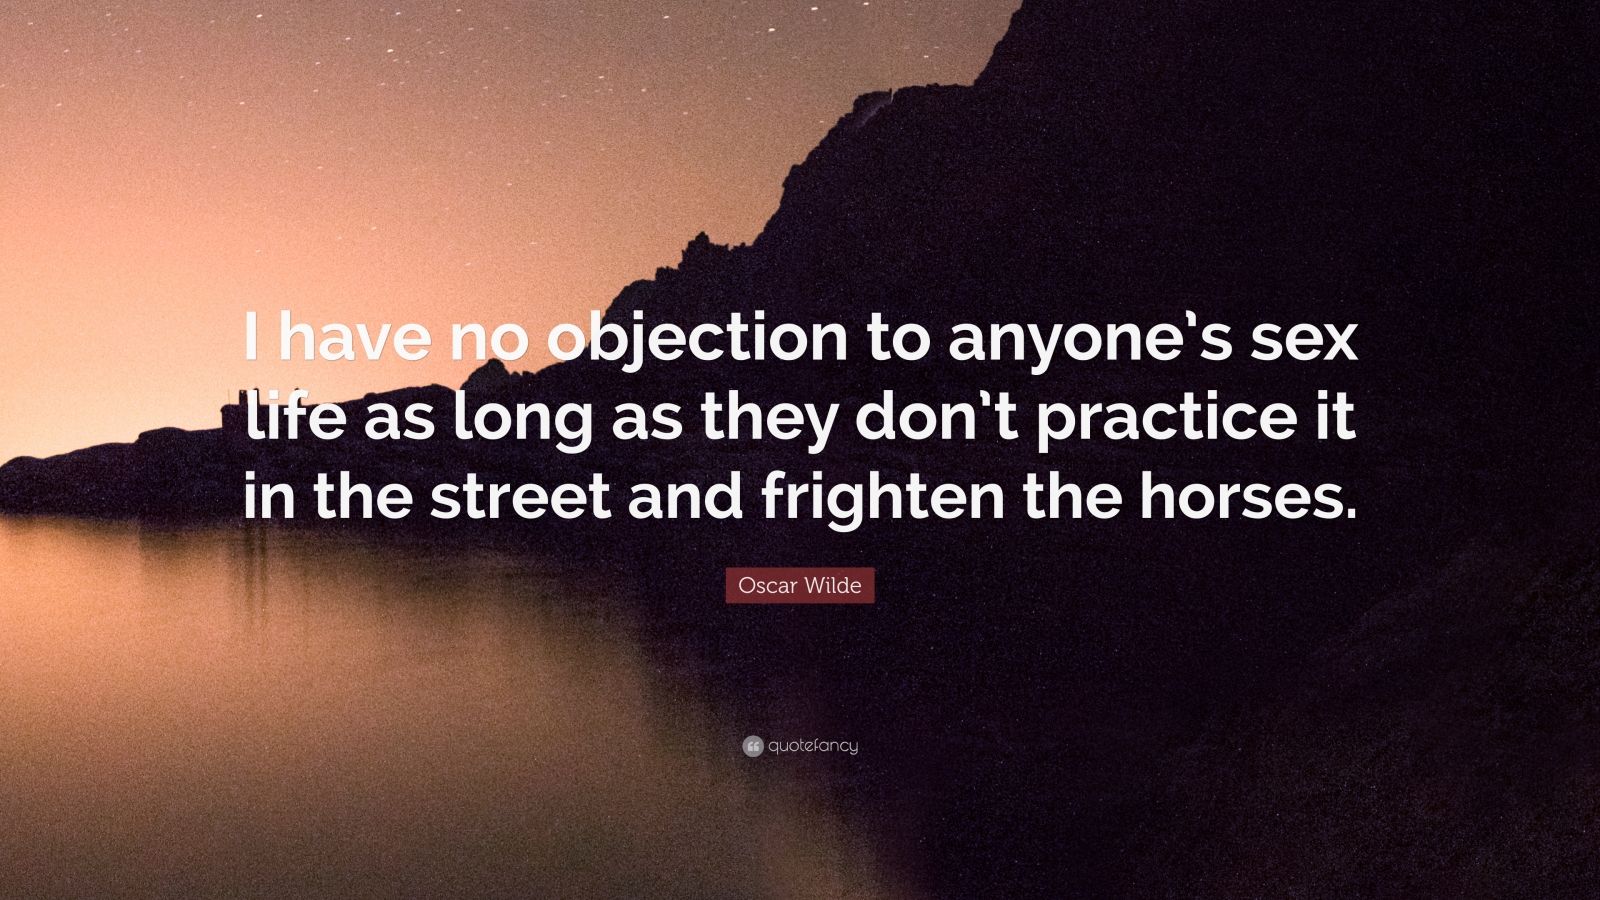 Oscar Wilde Quote “i Have No Objection To Anyone’s Sex Life As Long As They Don’t Practice It